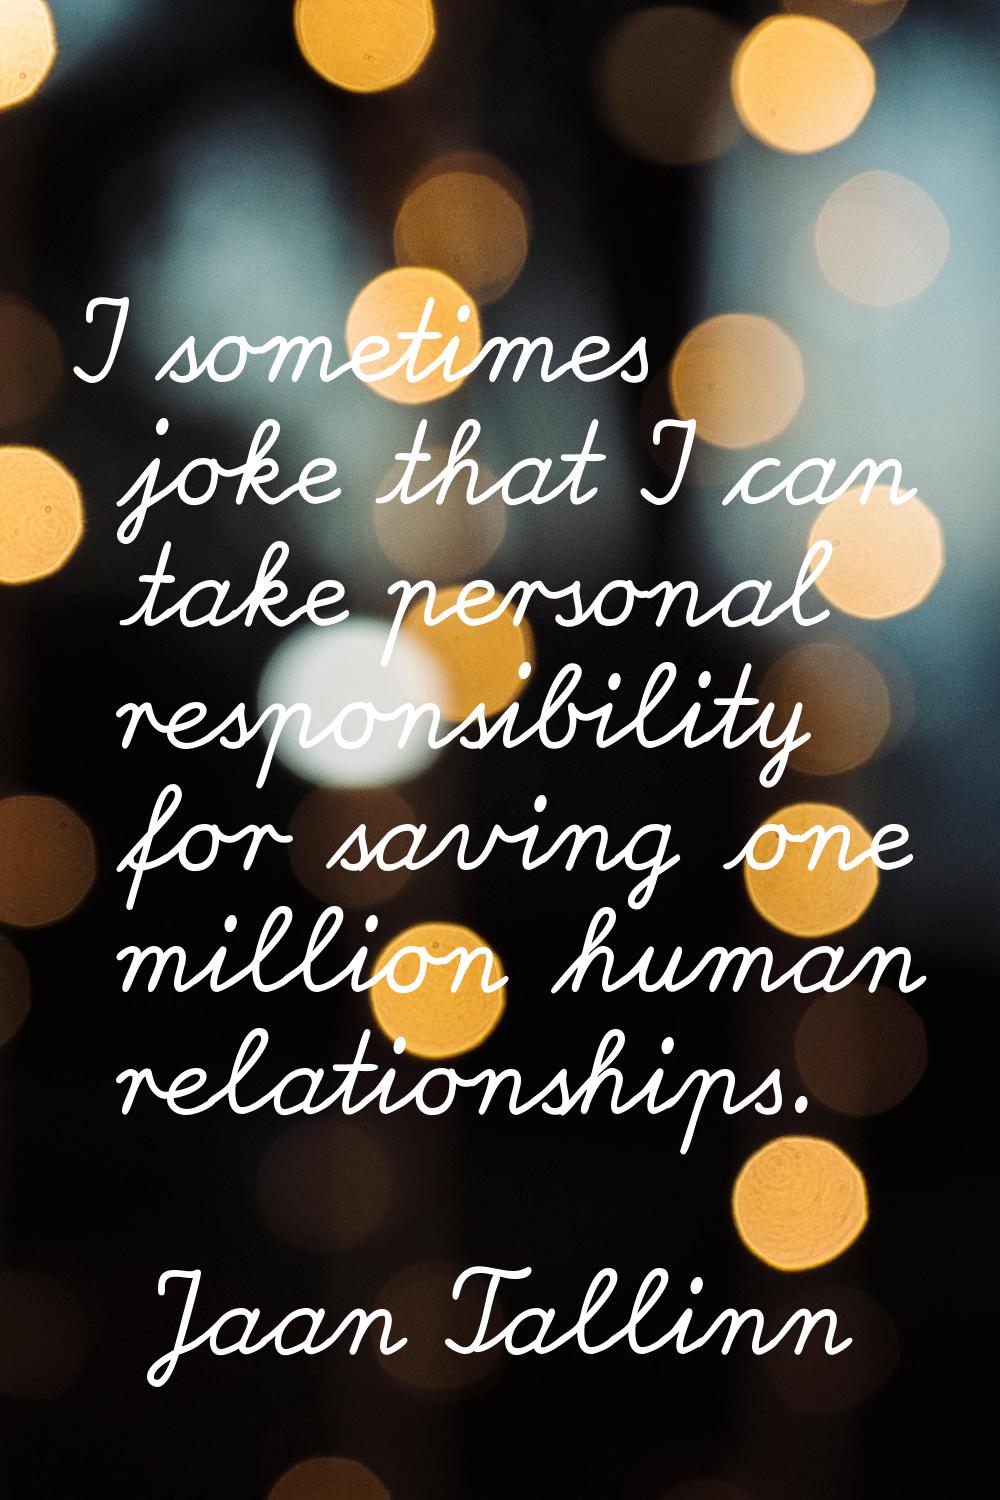 I sometimes joke that I can take personal responsibility for saving one million human relationships